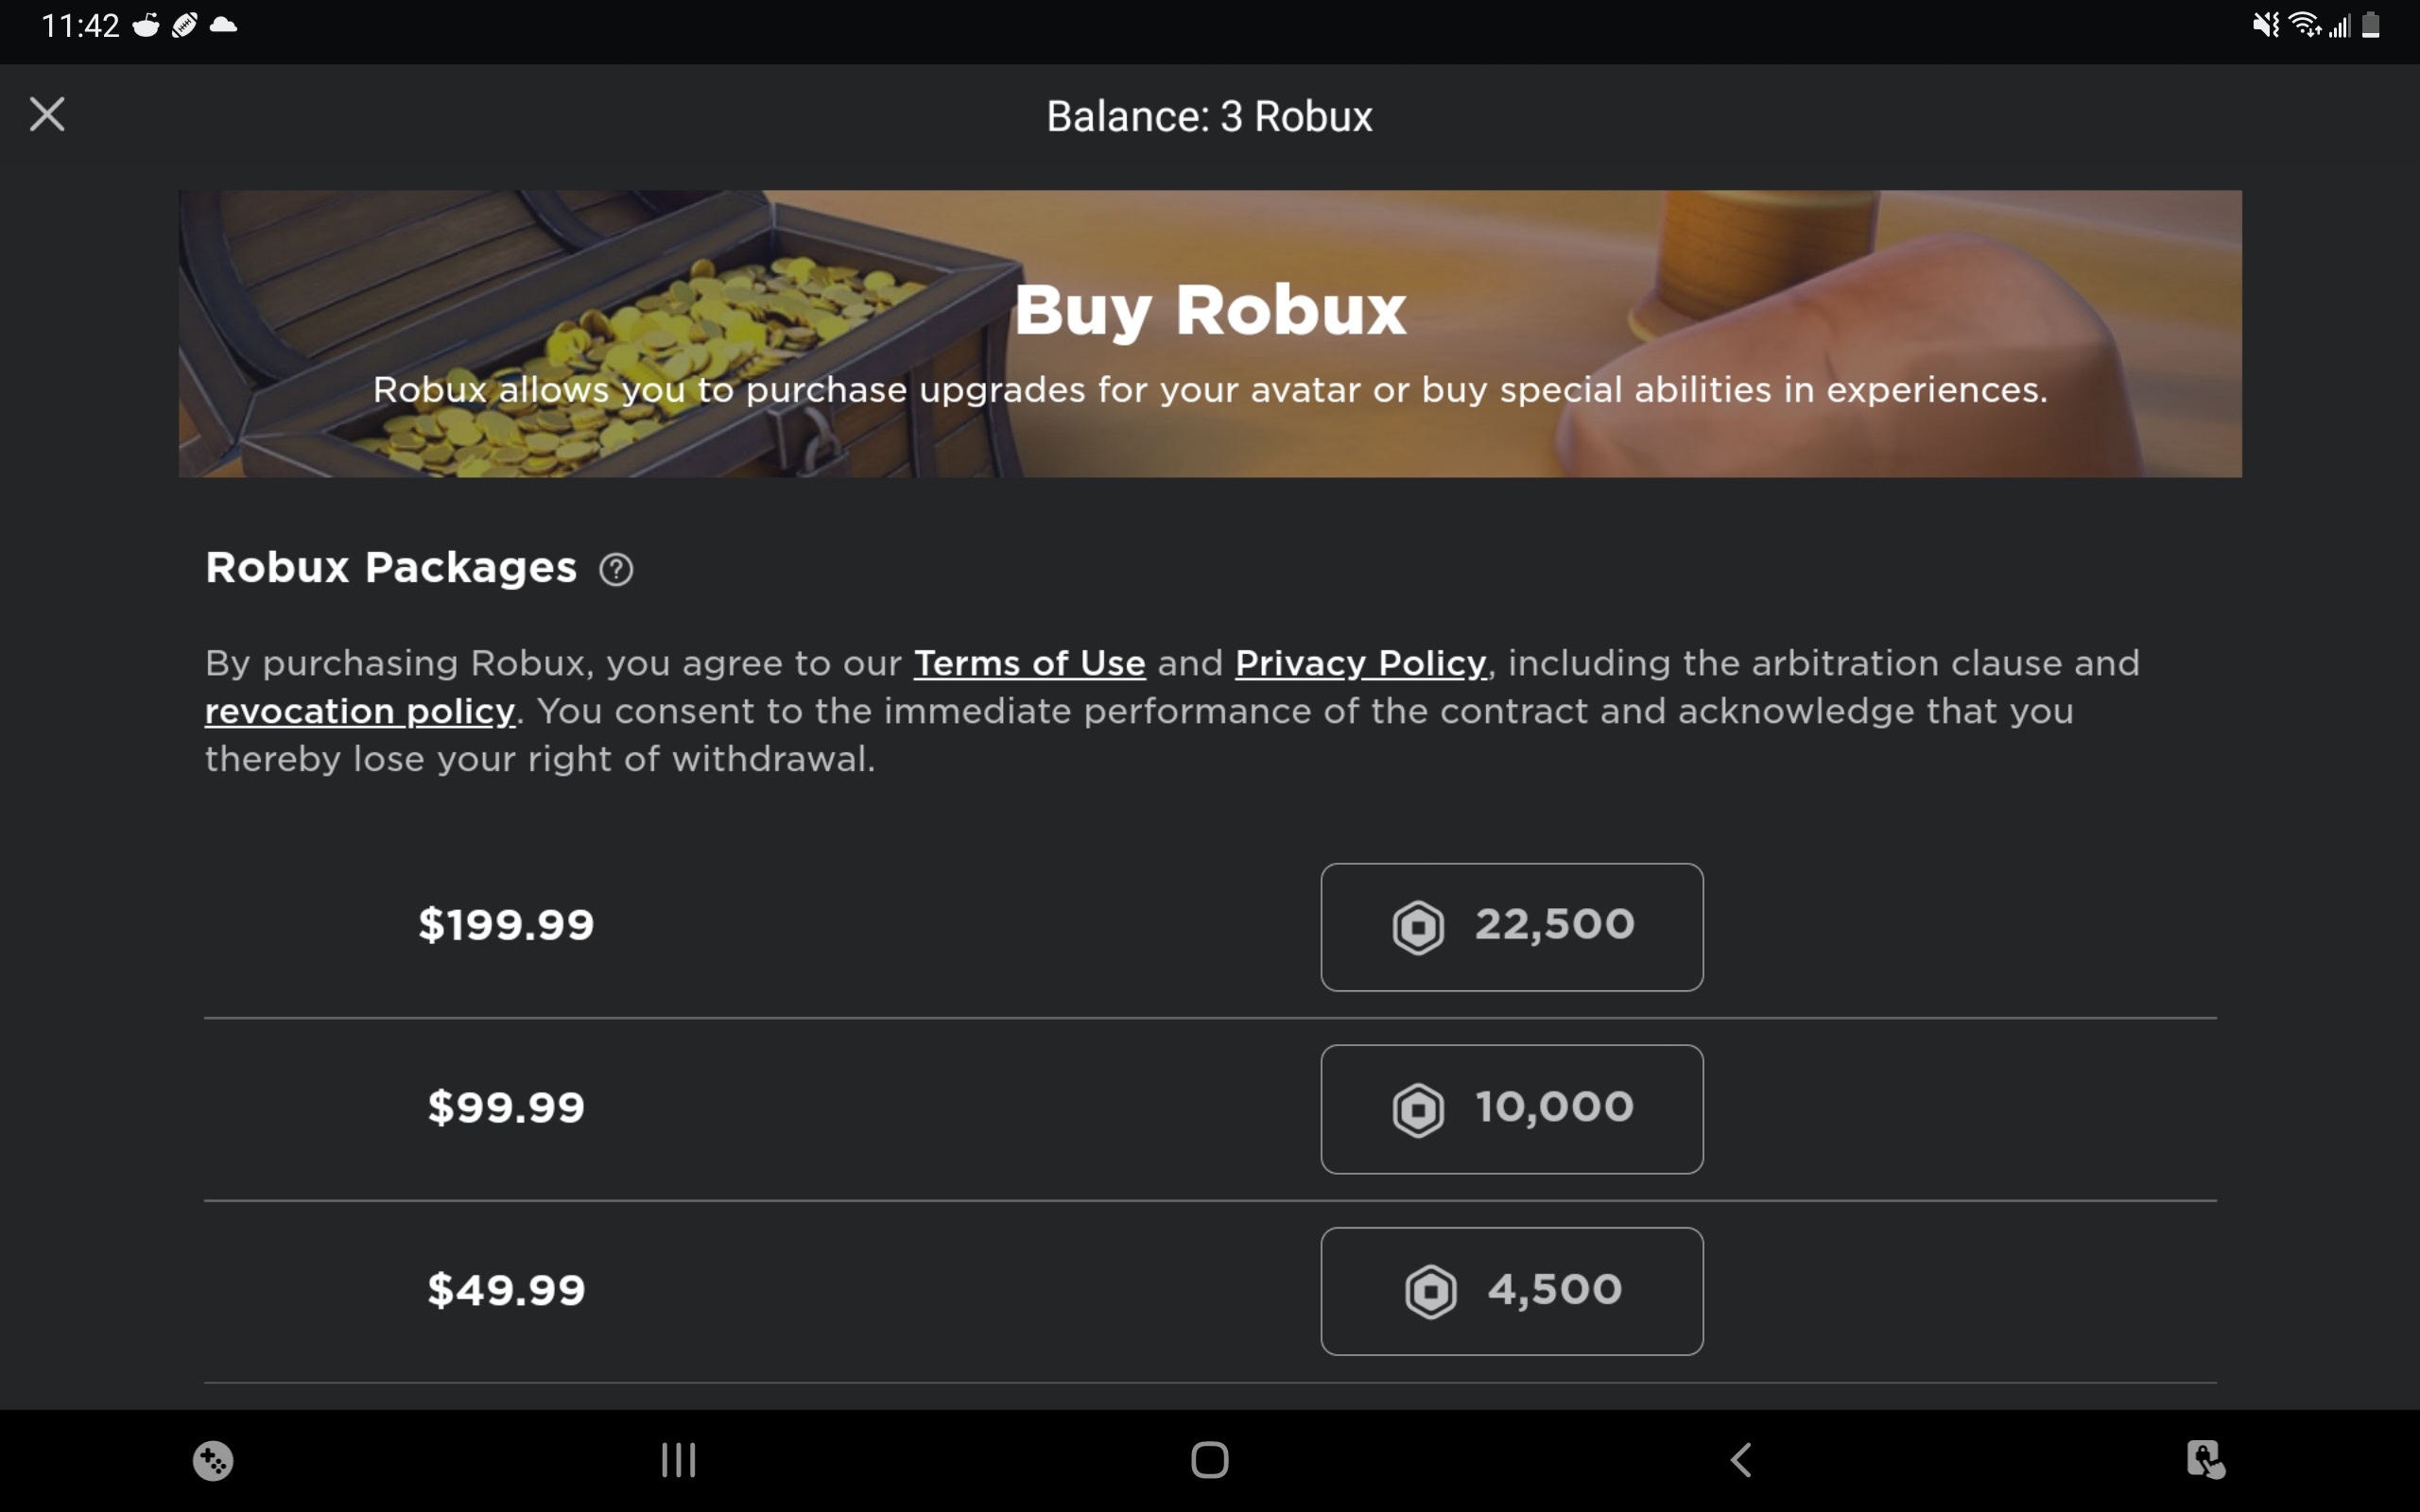 4500 Robux for Xbox